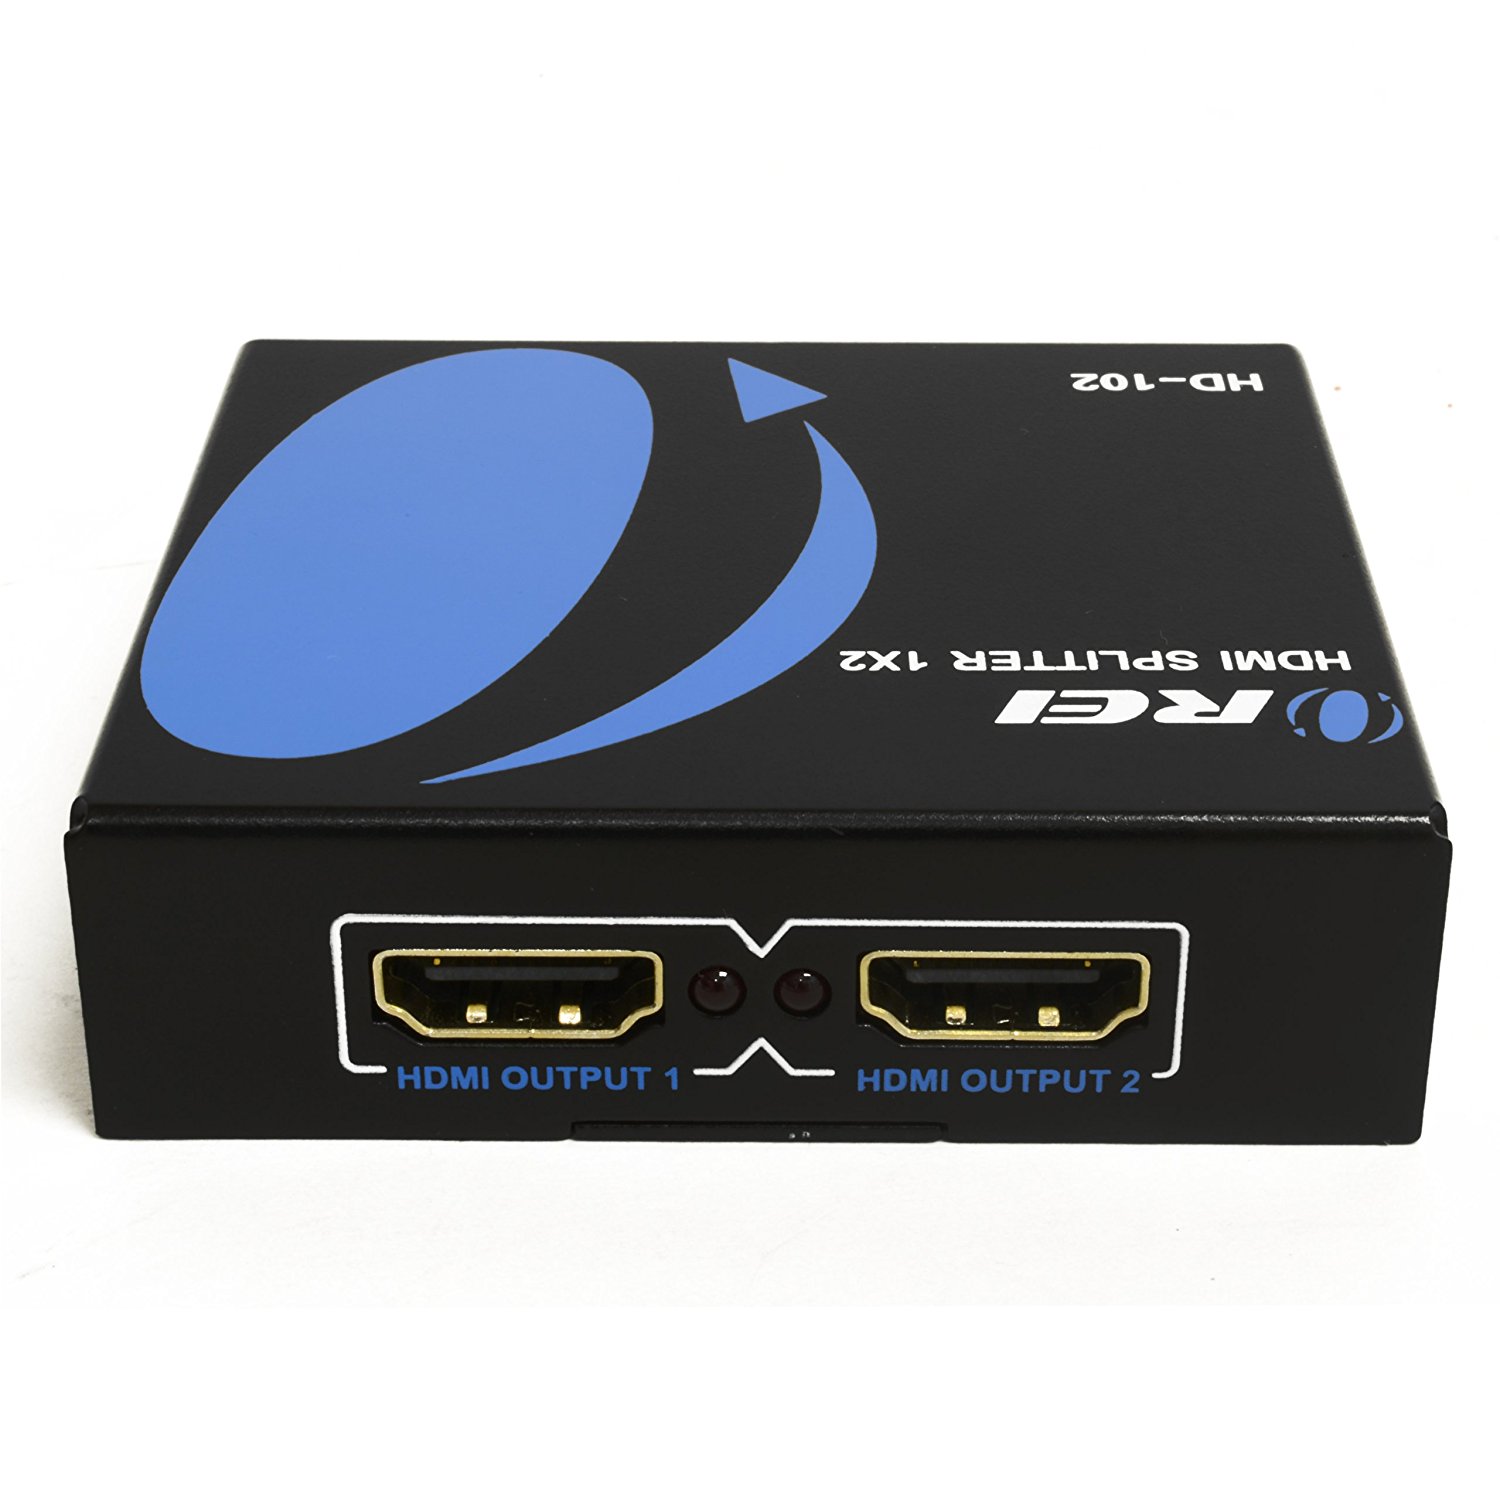 OREI HD-102 1x2 1 Port HDMI Powered Splitter Ver 1.3 Certified for Full HD 1080P & 3D Support